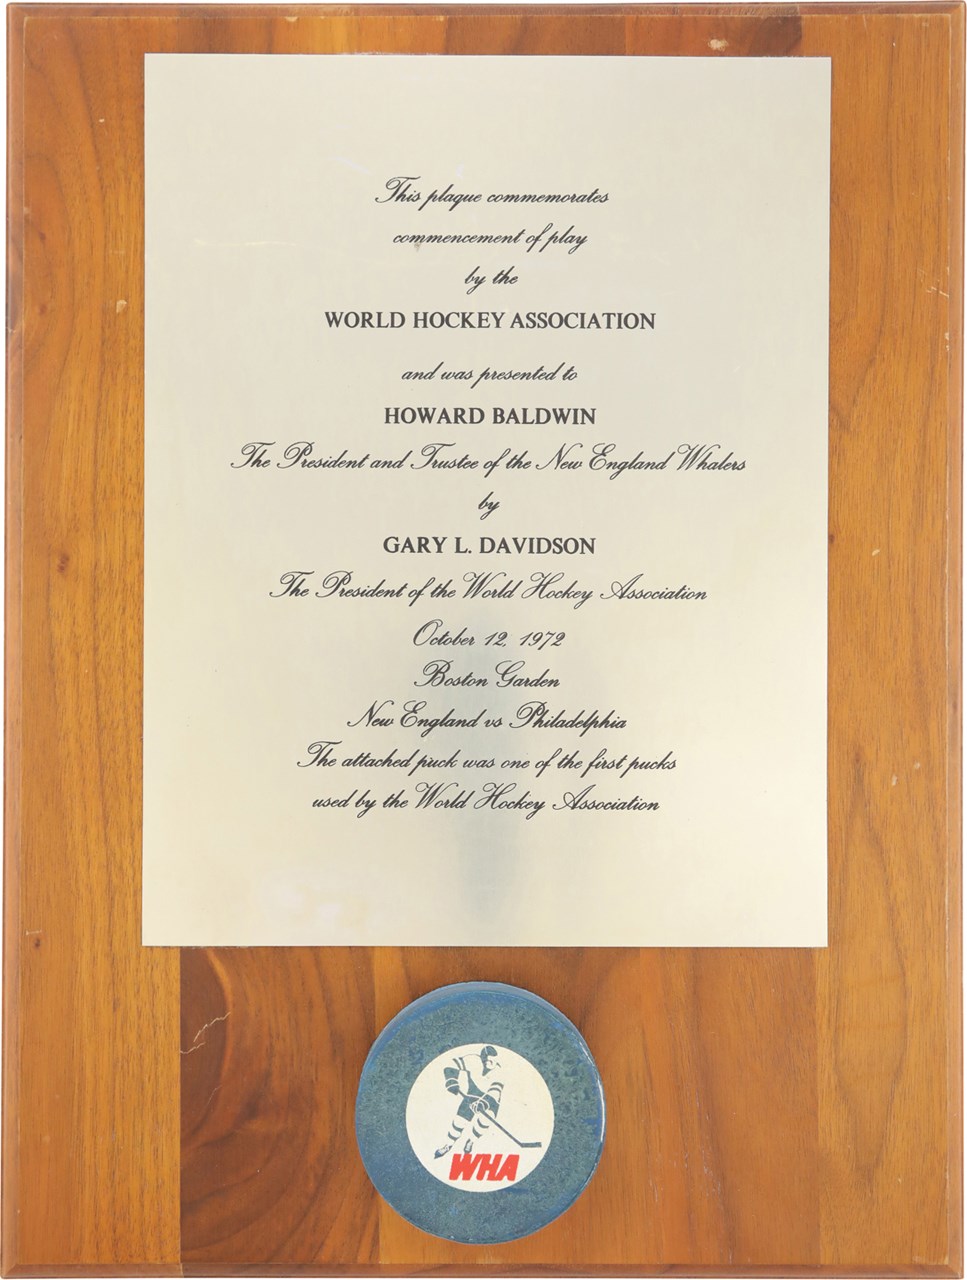 - 10/12/72 WHA Commencement of Play Award